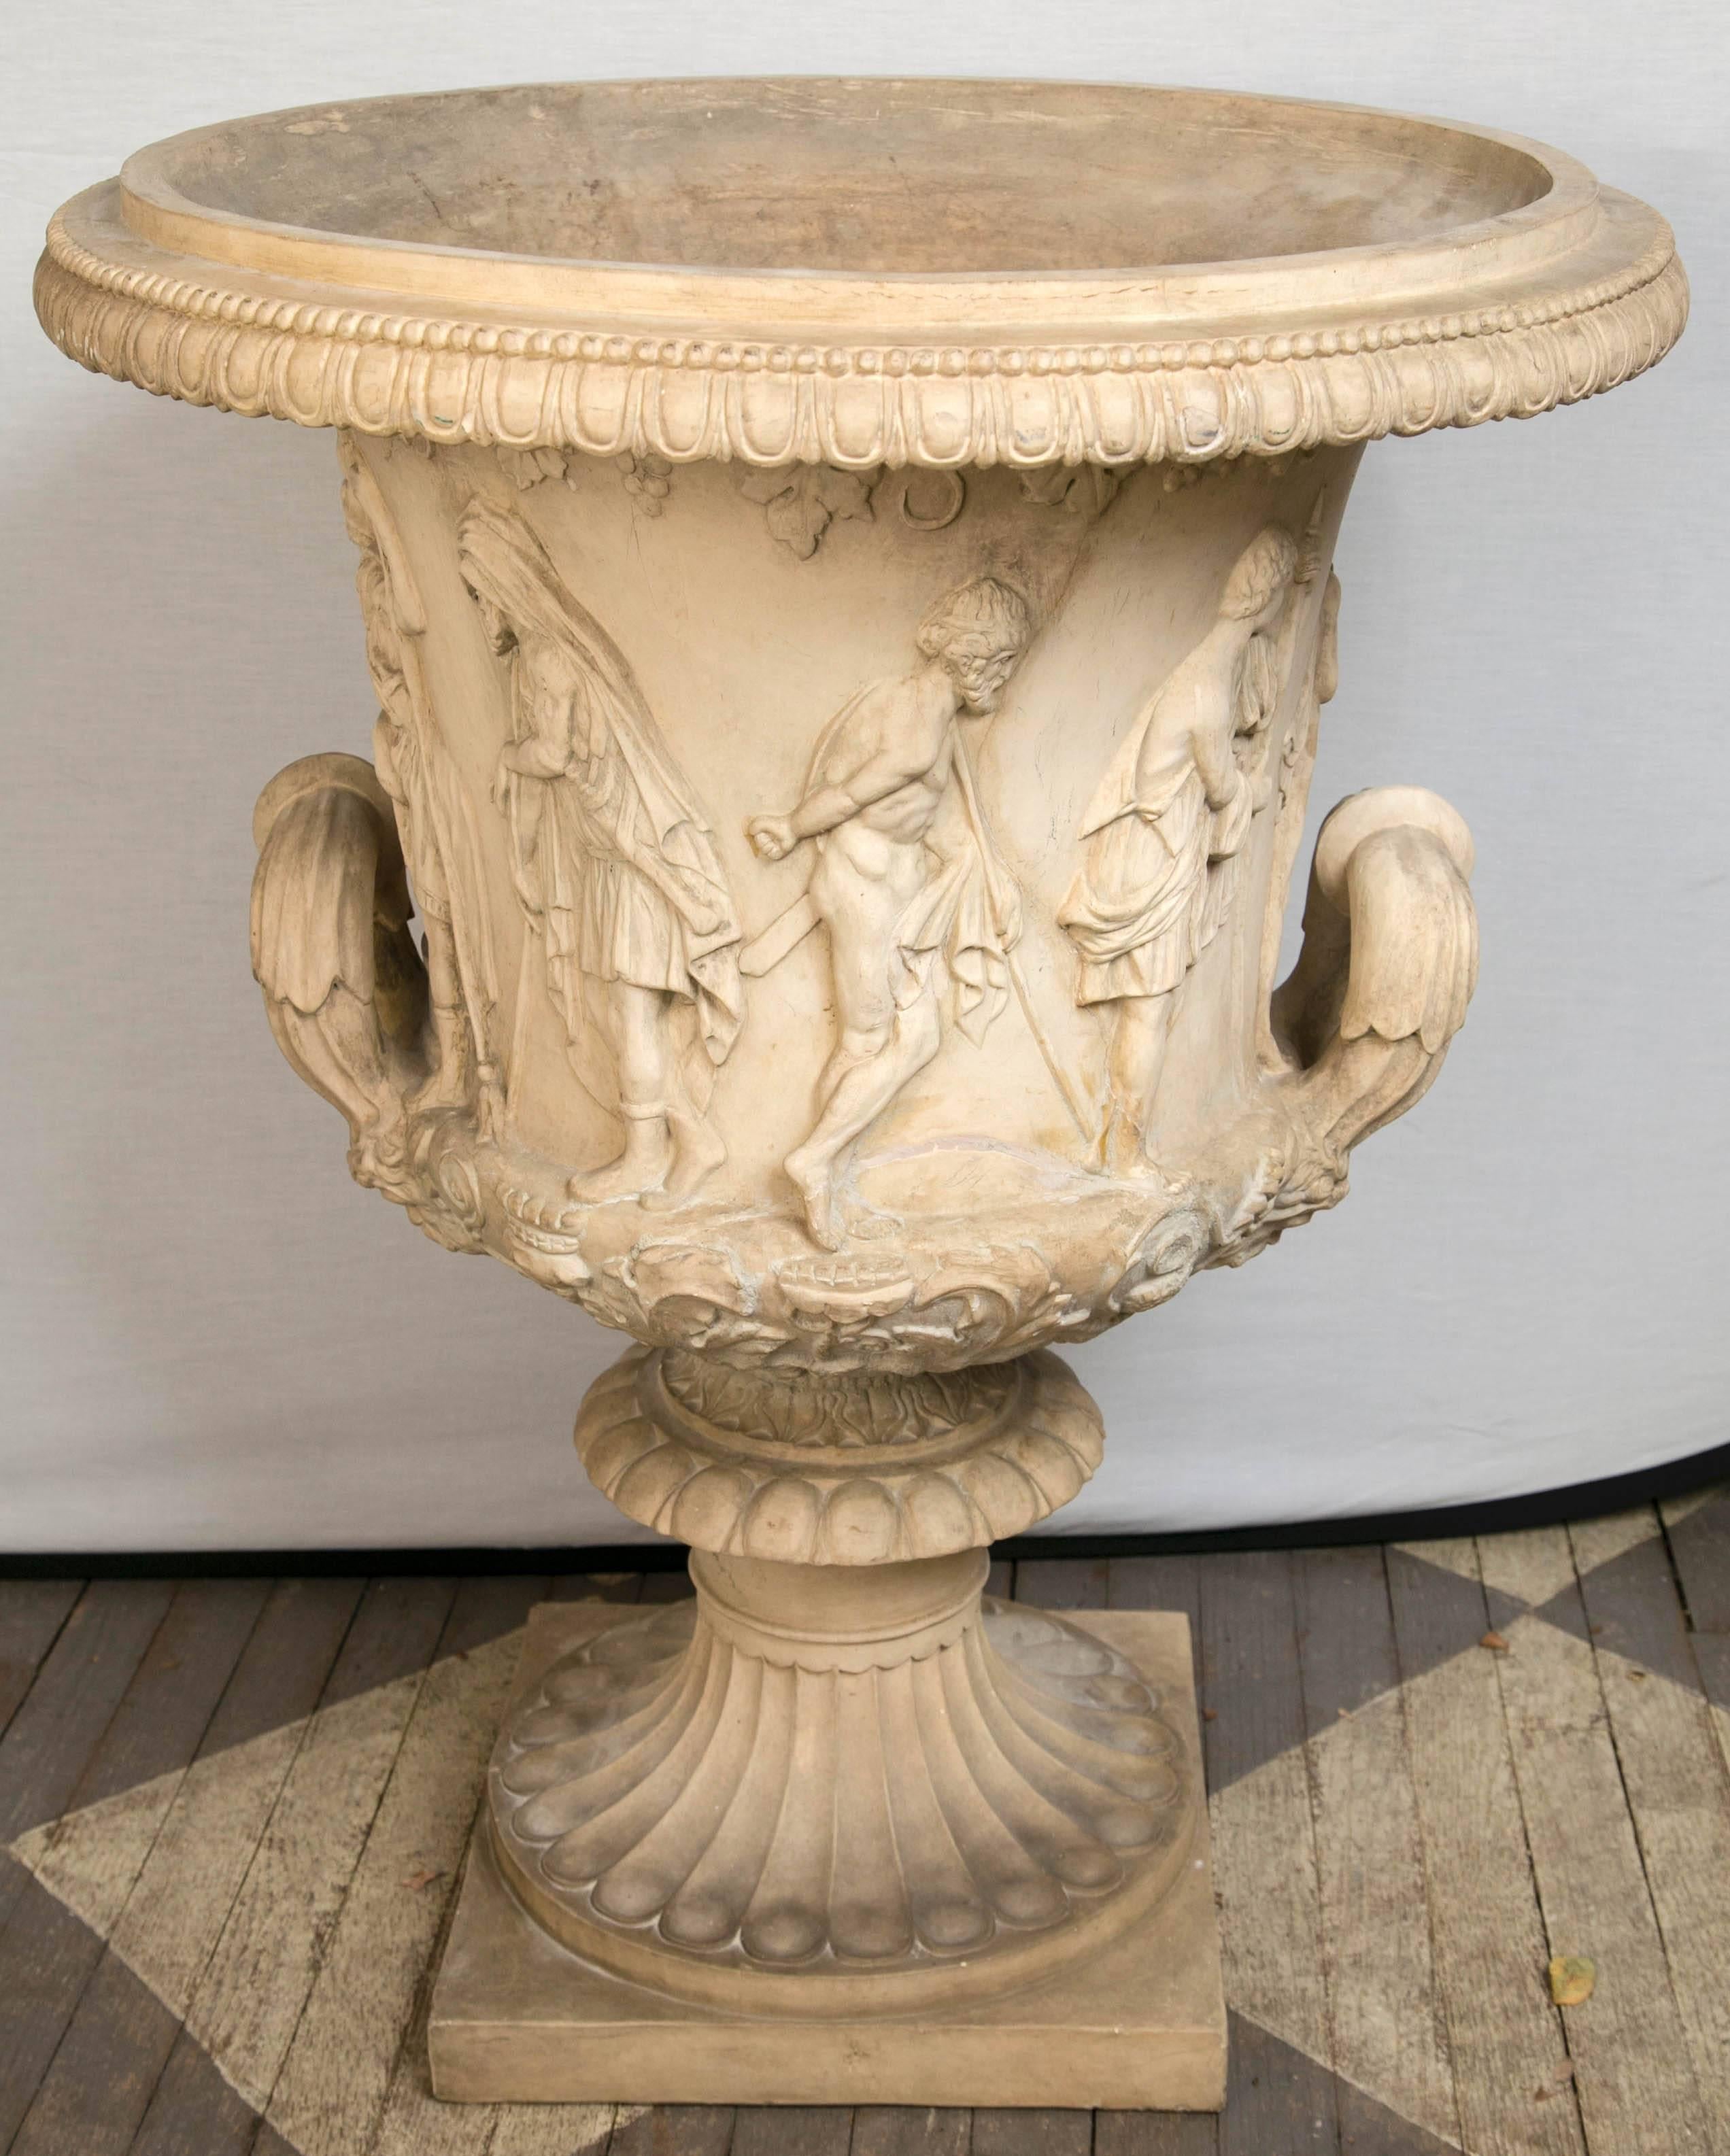 Impressive size Italian white terracotta neoclassic urn with a gadrooned and beaded rim. Below the rim are grapes, grape leaves the vines. The body decorated with ancient roman style figures and large handles. The socle is attached tom the body with